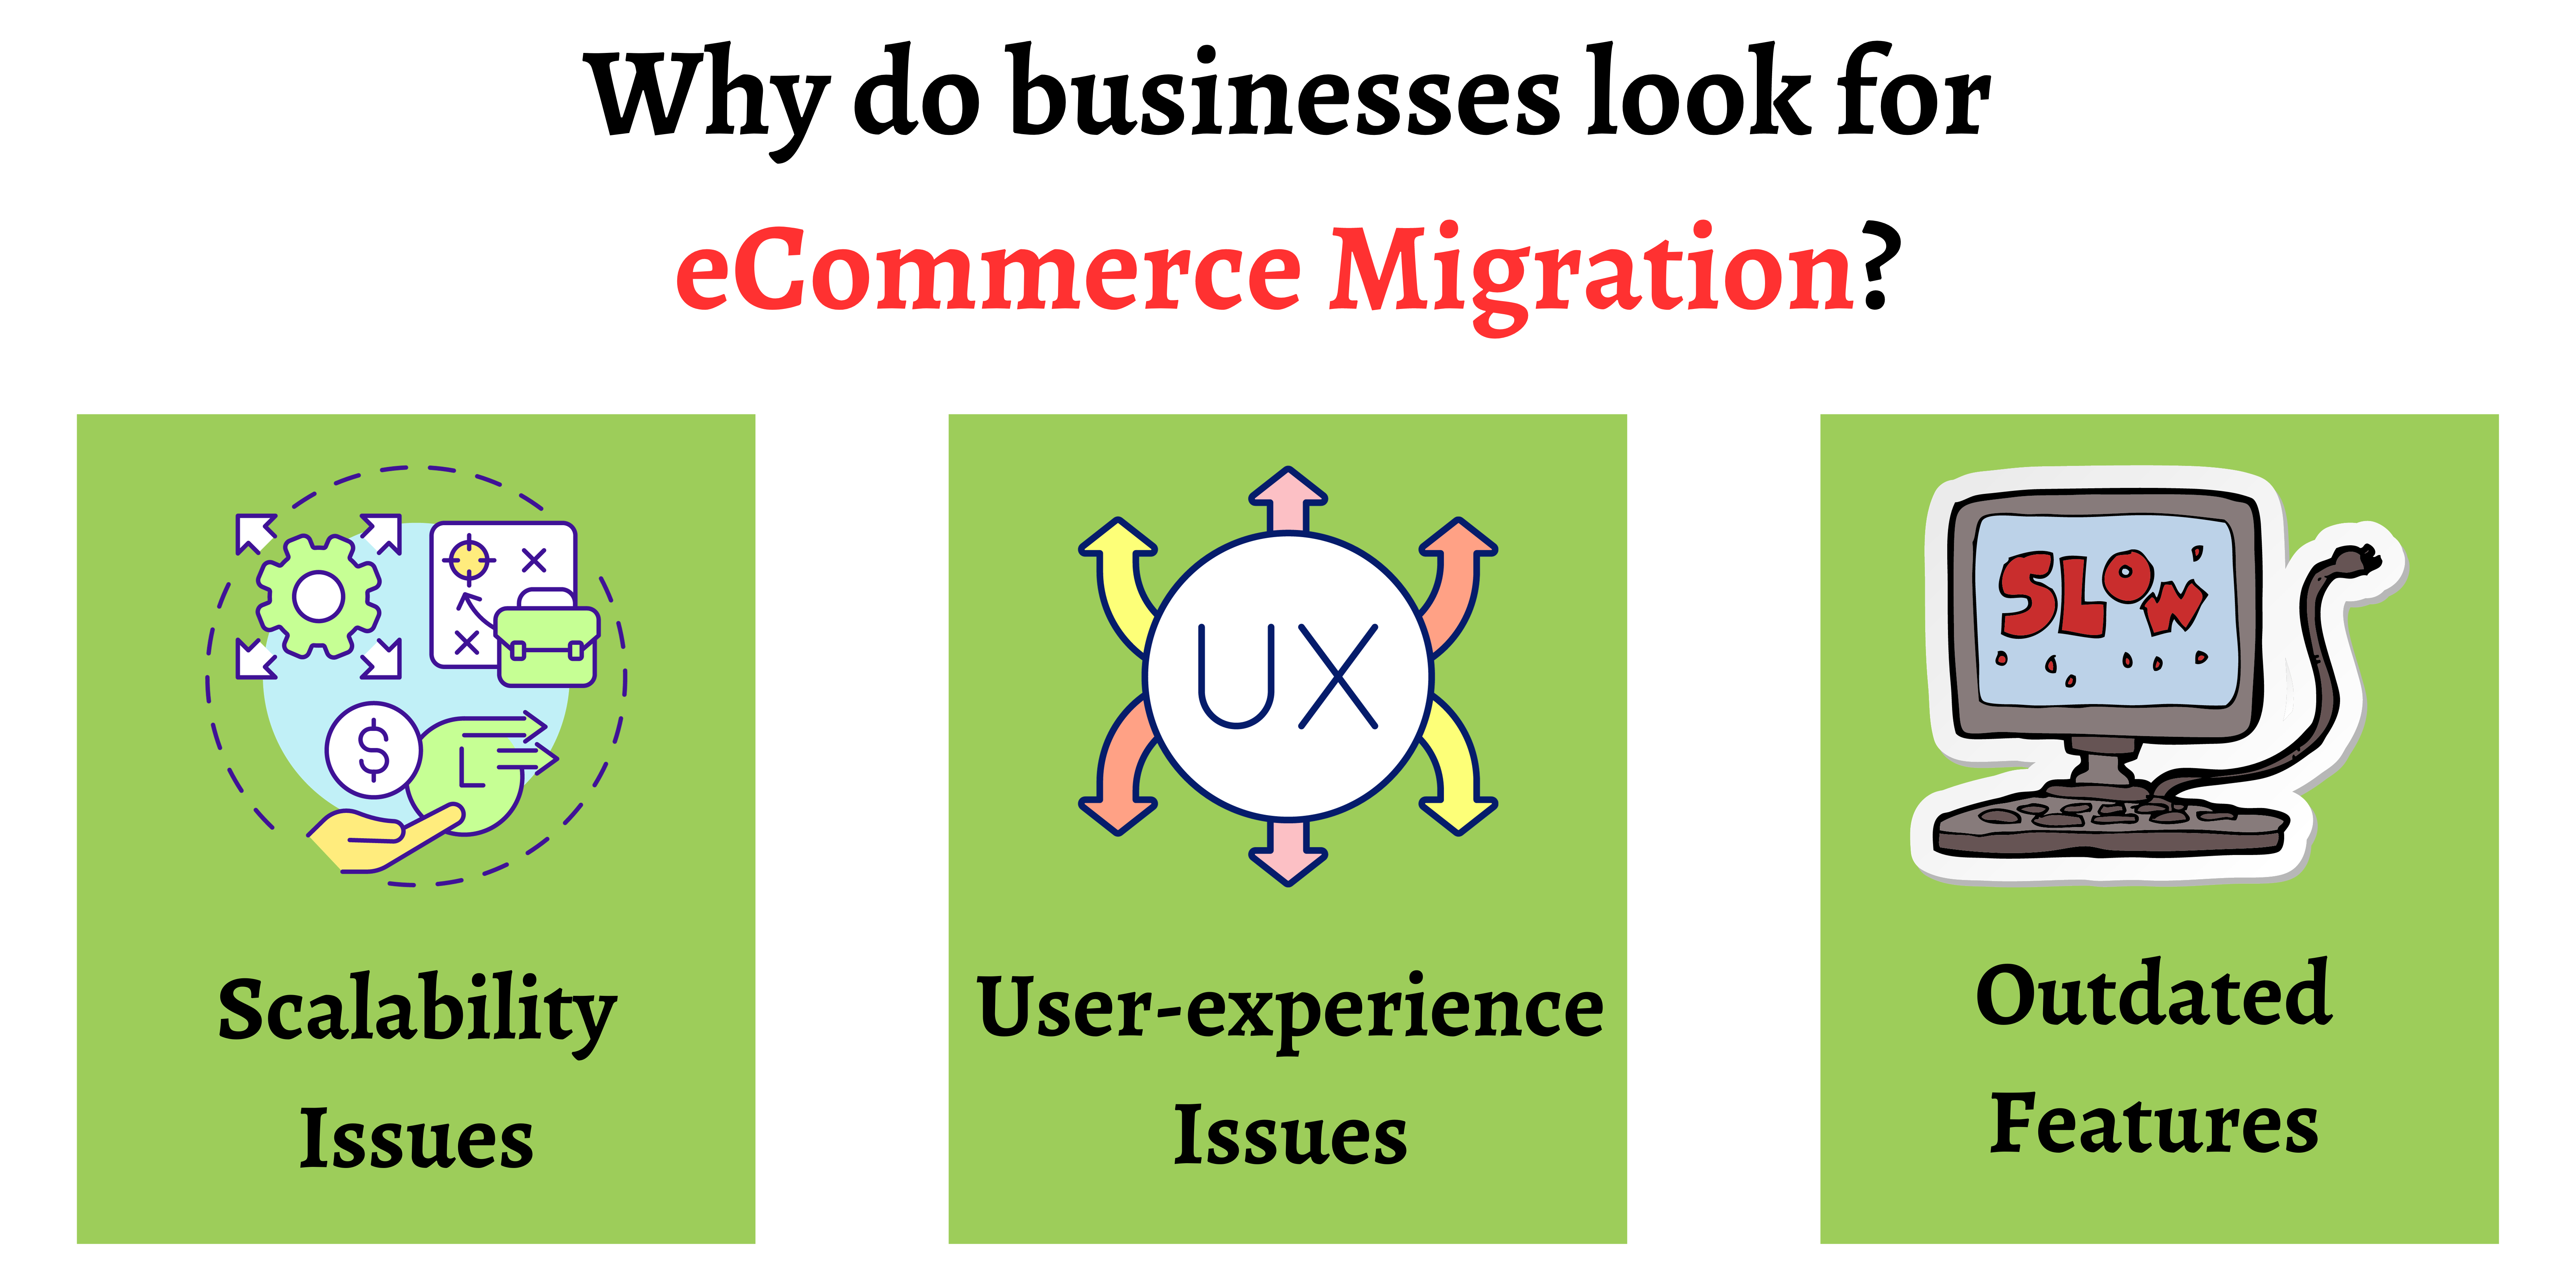 Why do businesses look for eCommerce Migration?